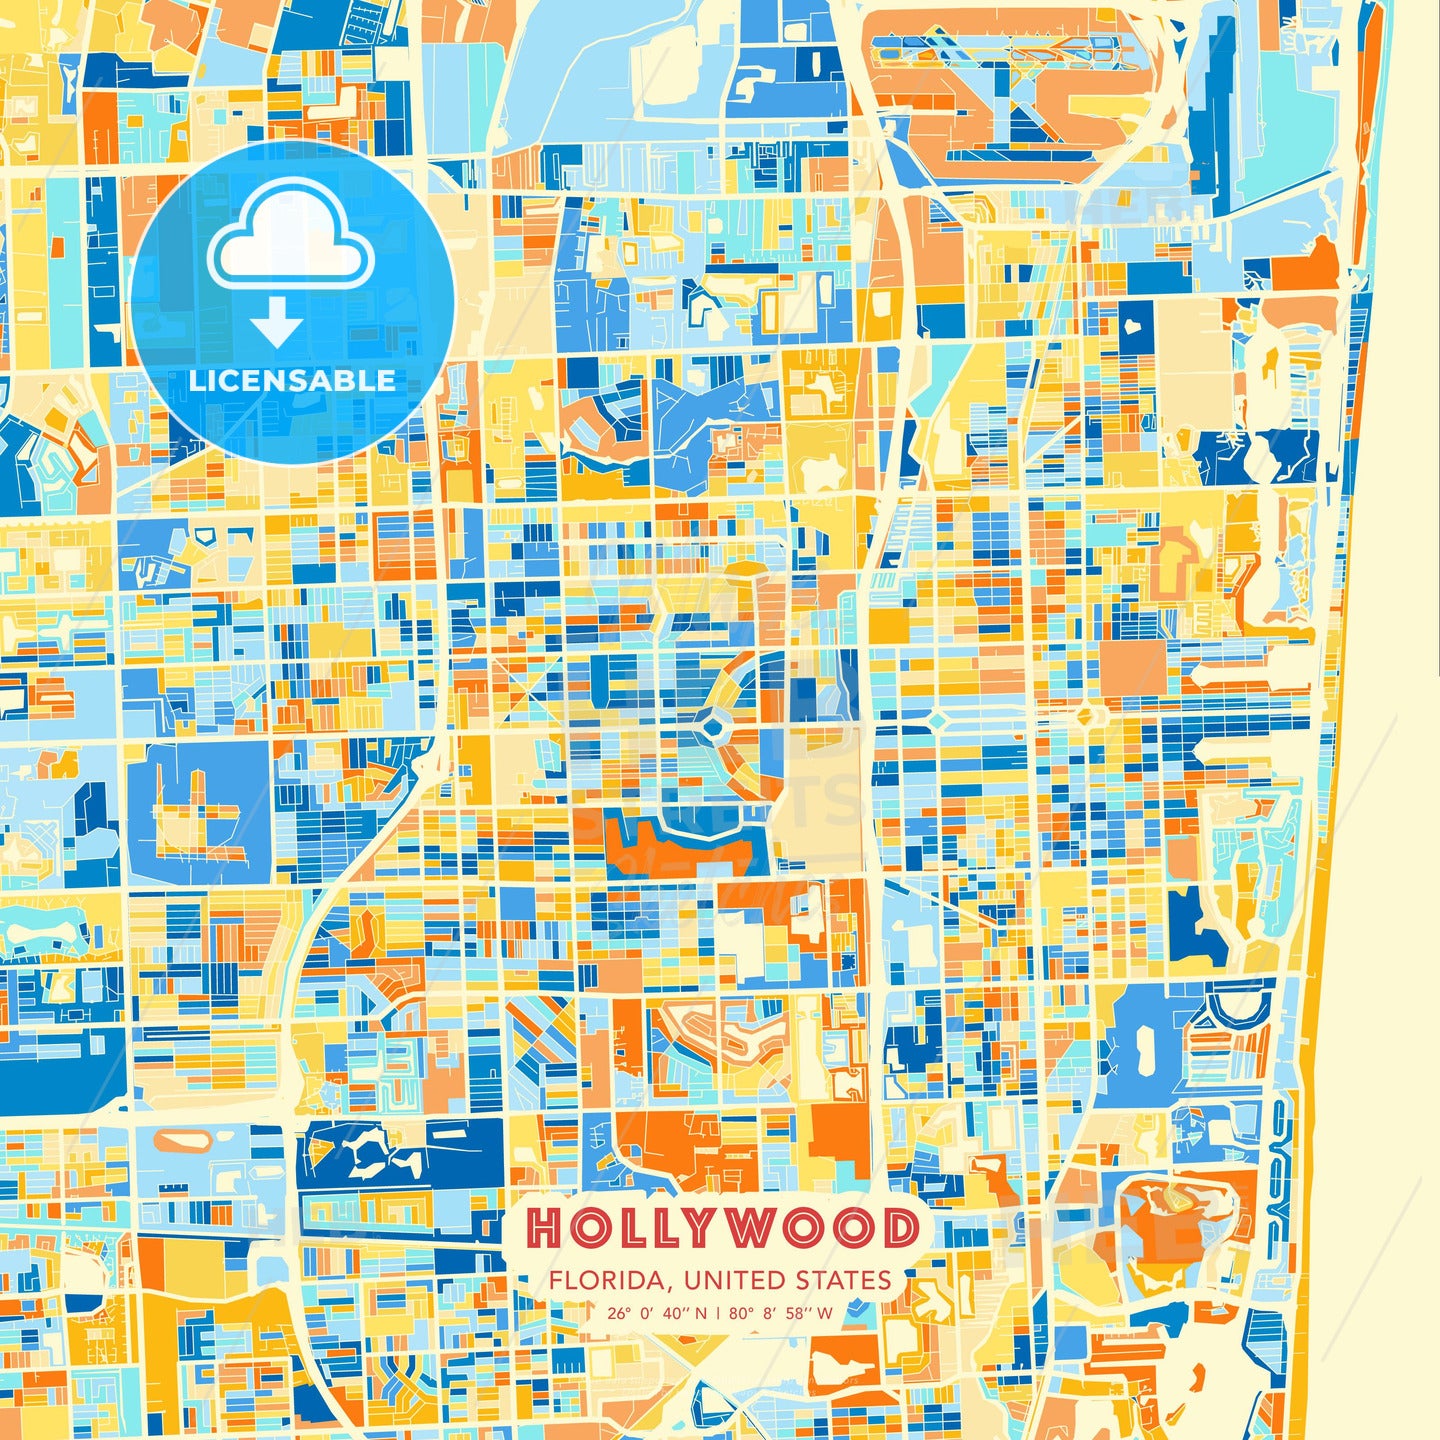 Hollywood, Florida, United States, map - HEBSTREITS Sketches